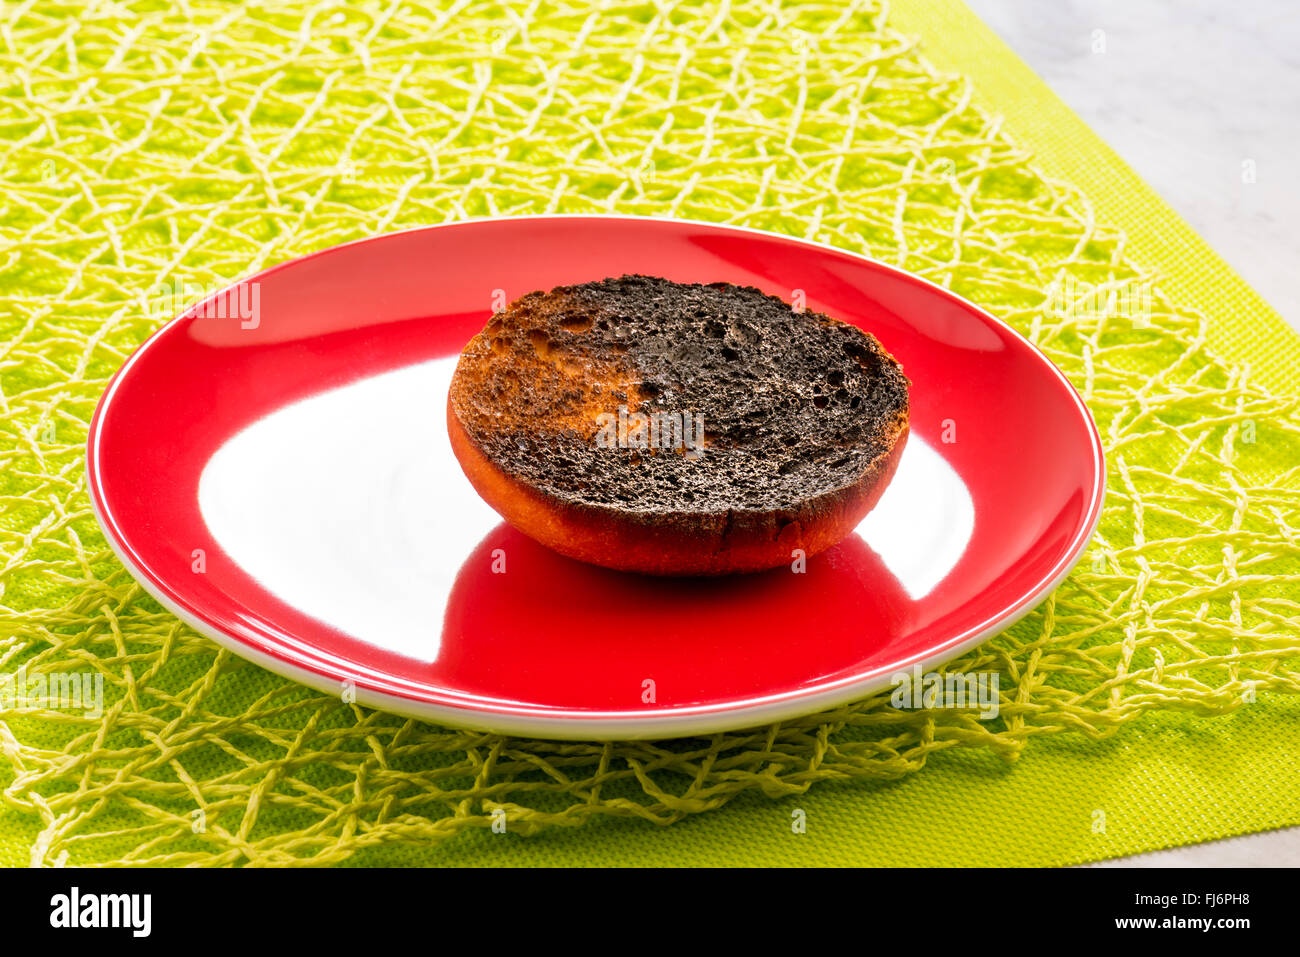 burnt toast, slice, since the toast is burned black, ruined, inedible, coal, on red plate, green background, spring, breakfast, Stock Photo